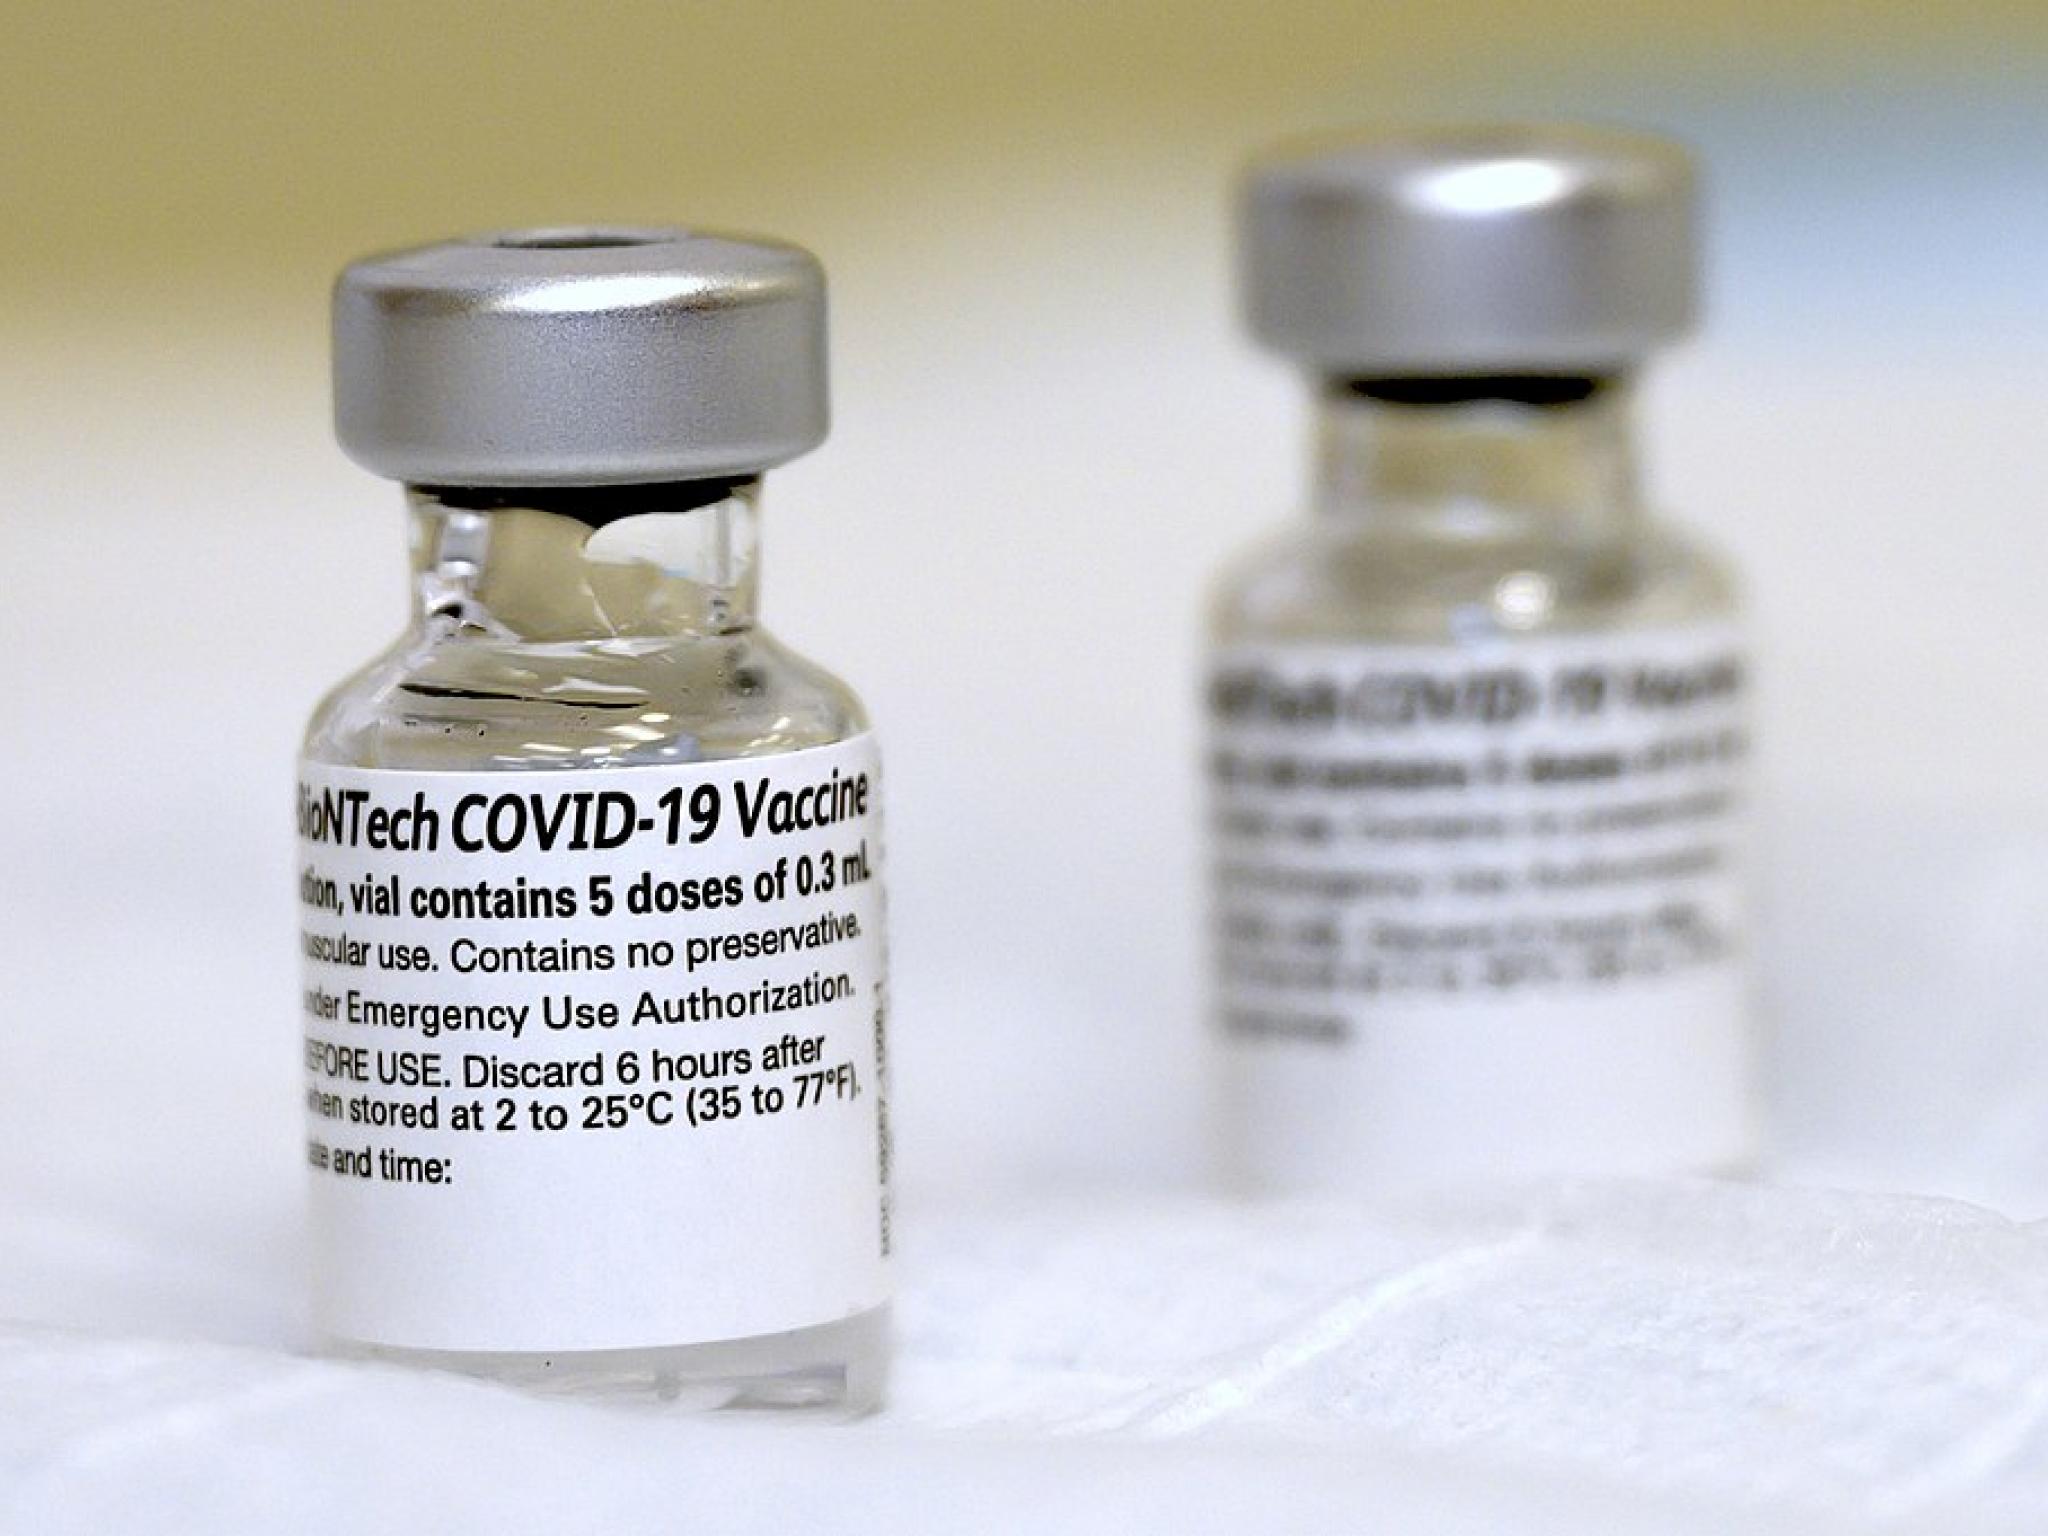  european-commission-faces-court-criticism-over-covid-vaccine-contract-transparency-ahead-of-vote-on-ursula-von-der-leyens-reappointment 